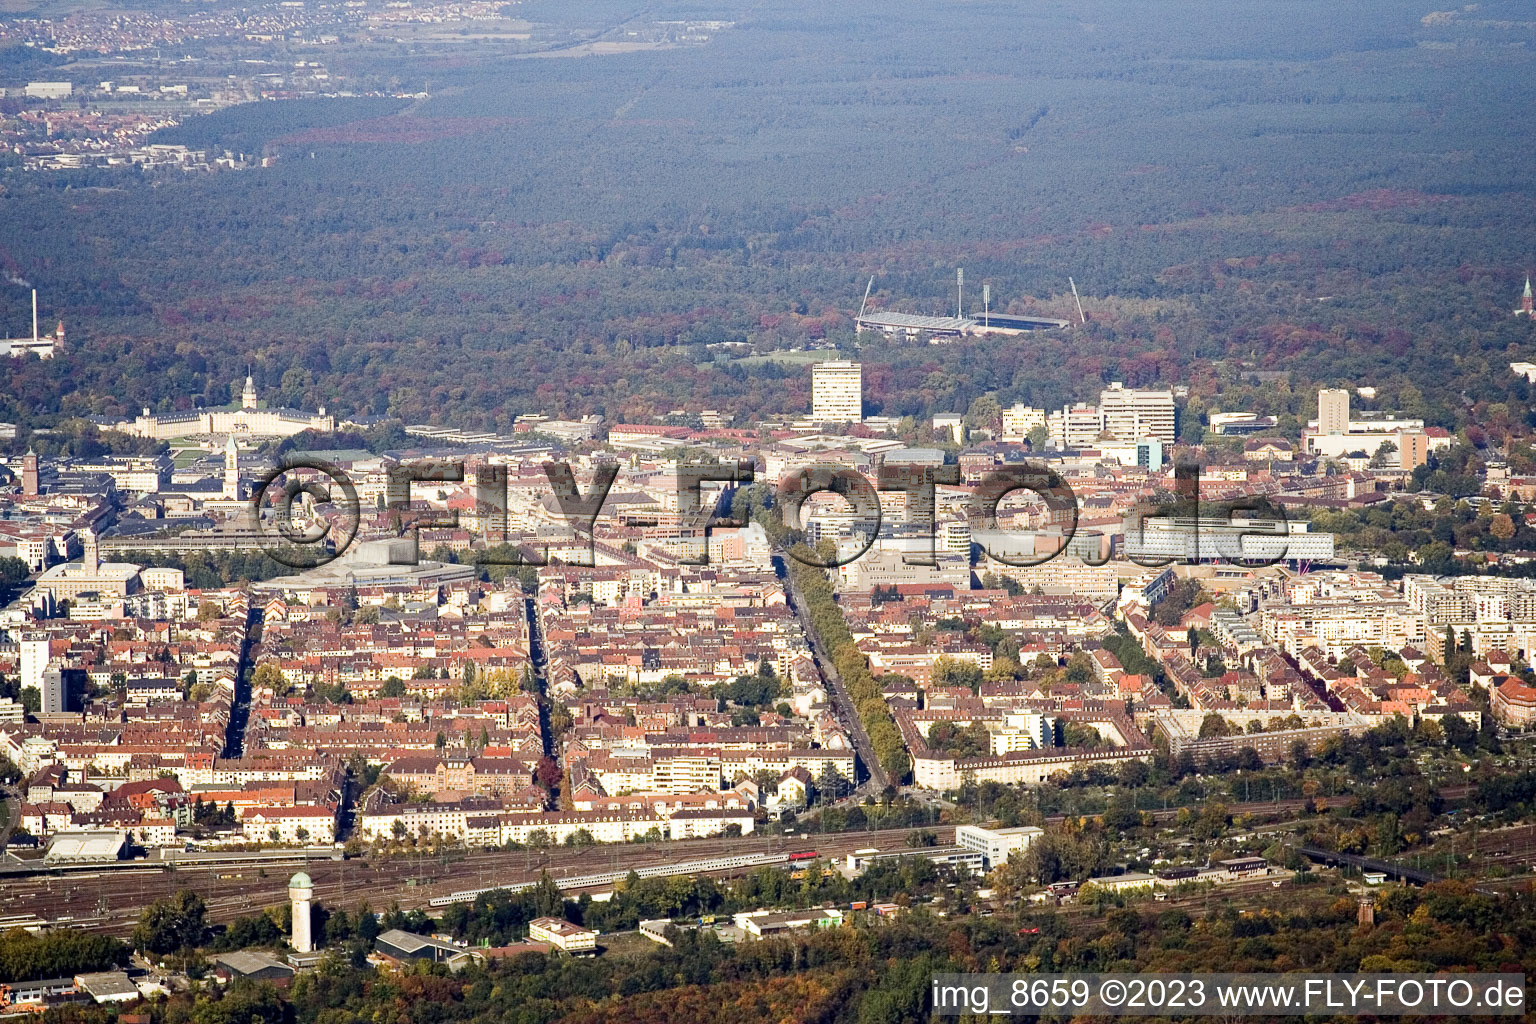 Aerial view of From the south in the district Südstadt in Karlsruhe in the state Baden-Wuerttemberg, Germany